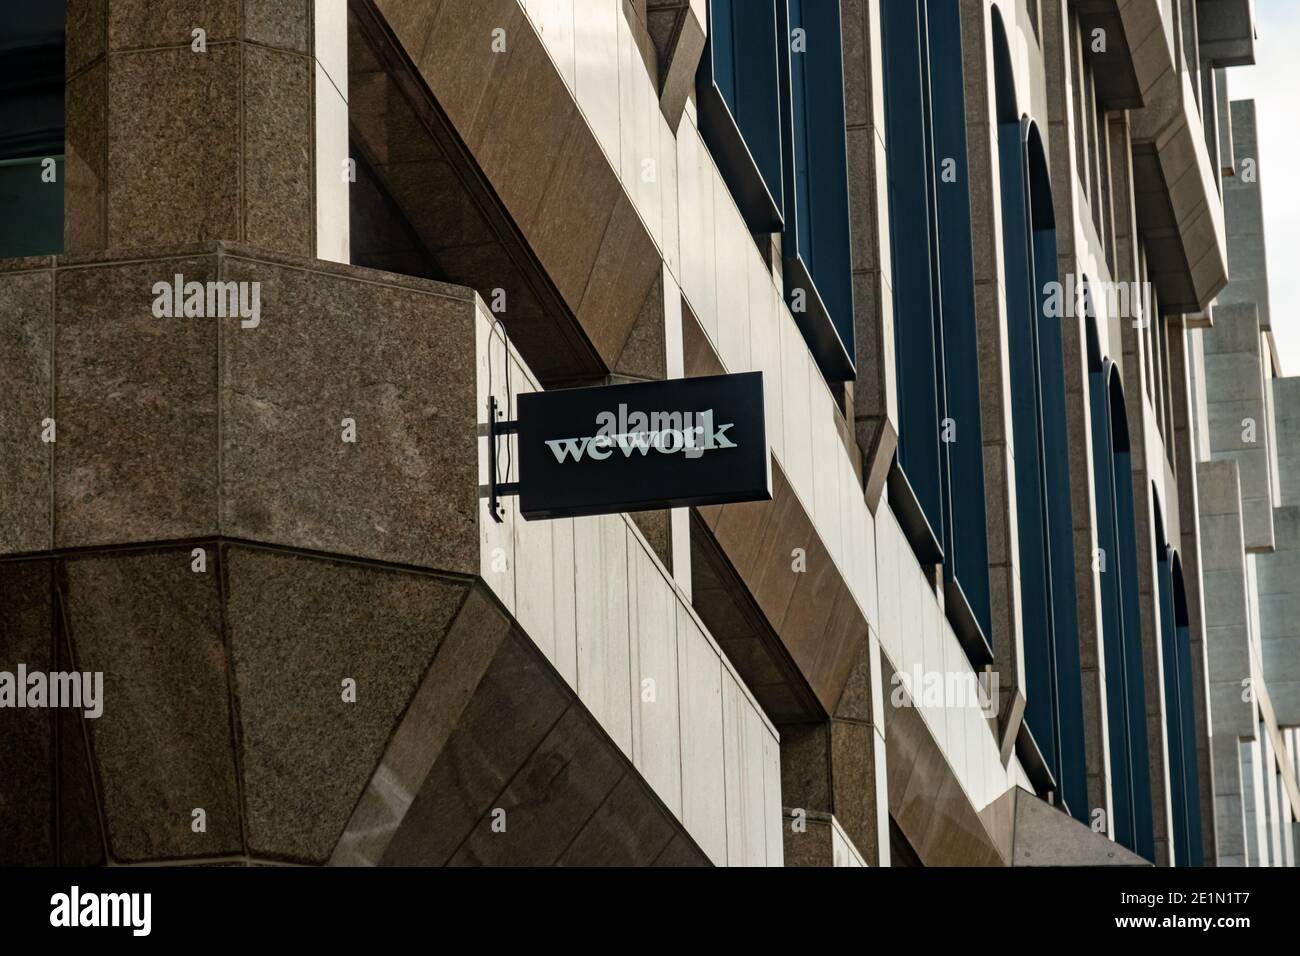 London- WeWork branch in the City of London,  an American commercial real estate company that provides flexible shared workspaces Stock Photo